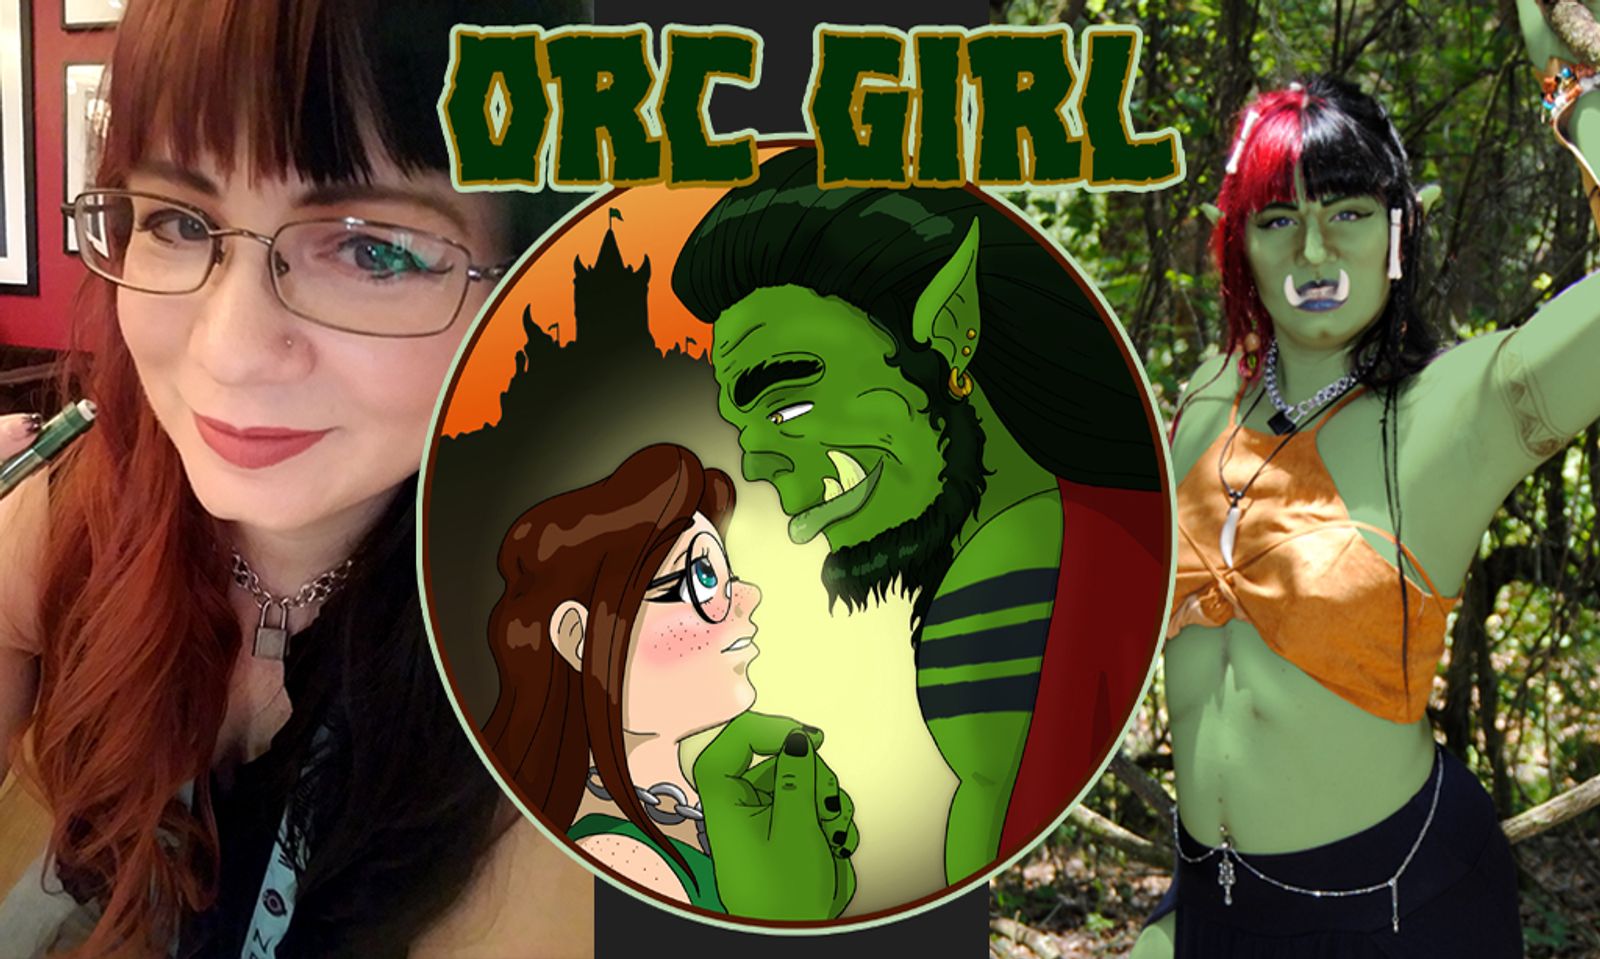 Fetish Model Ami Mercury Launches 'How to Be Orc' Campaign